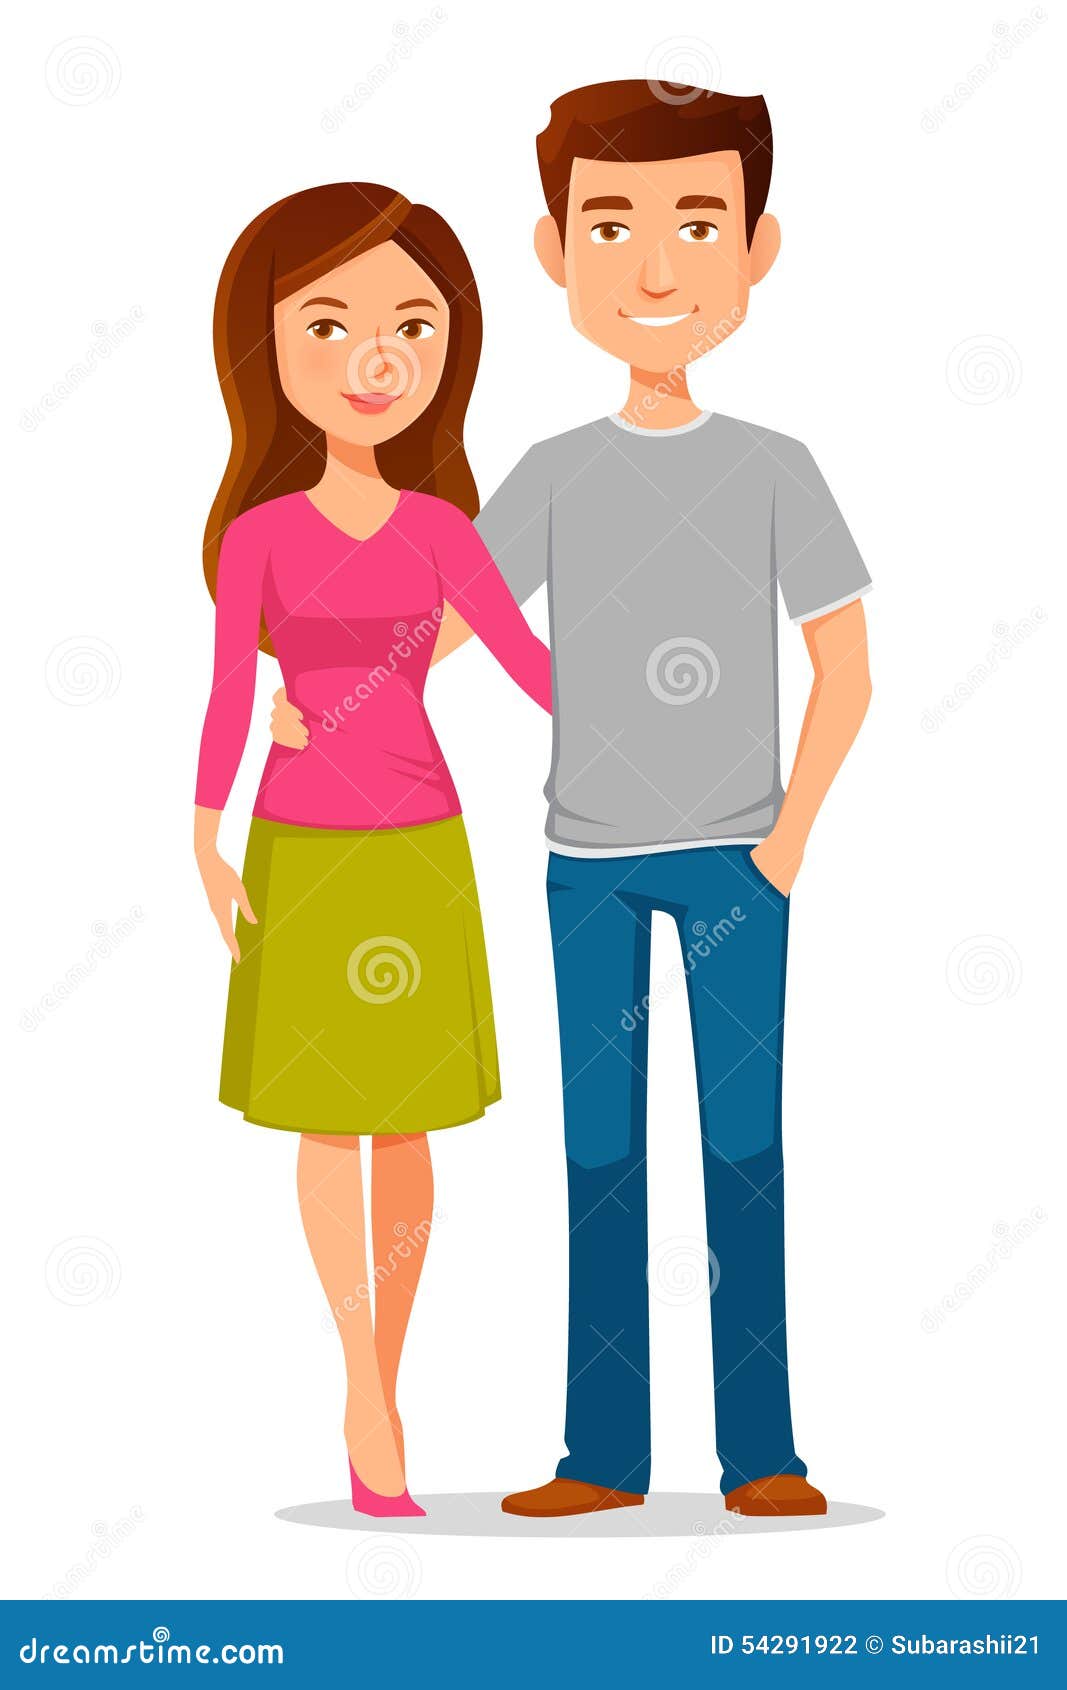 Young cartoon couple stock vector. Illustration of couple - 54291922